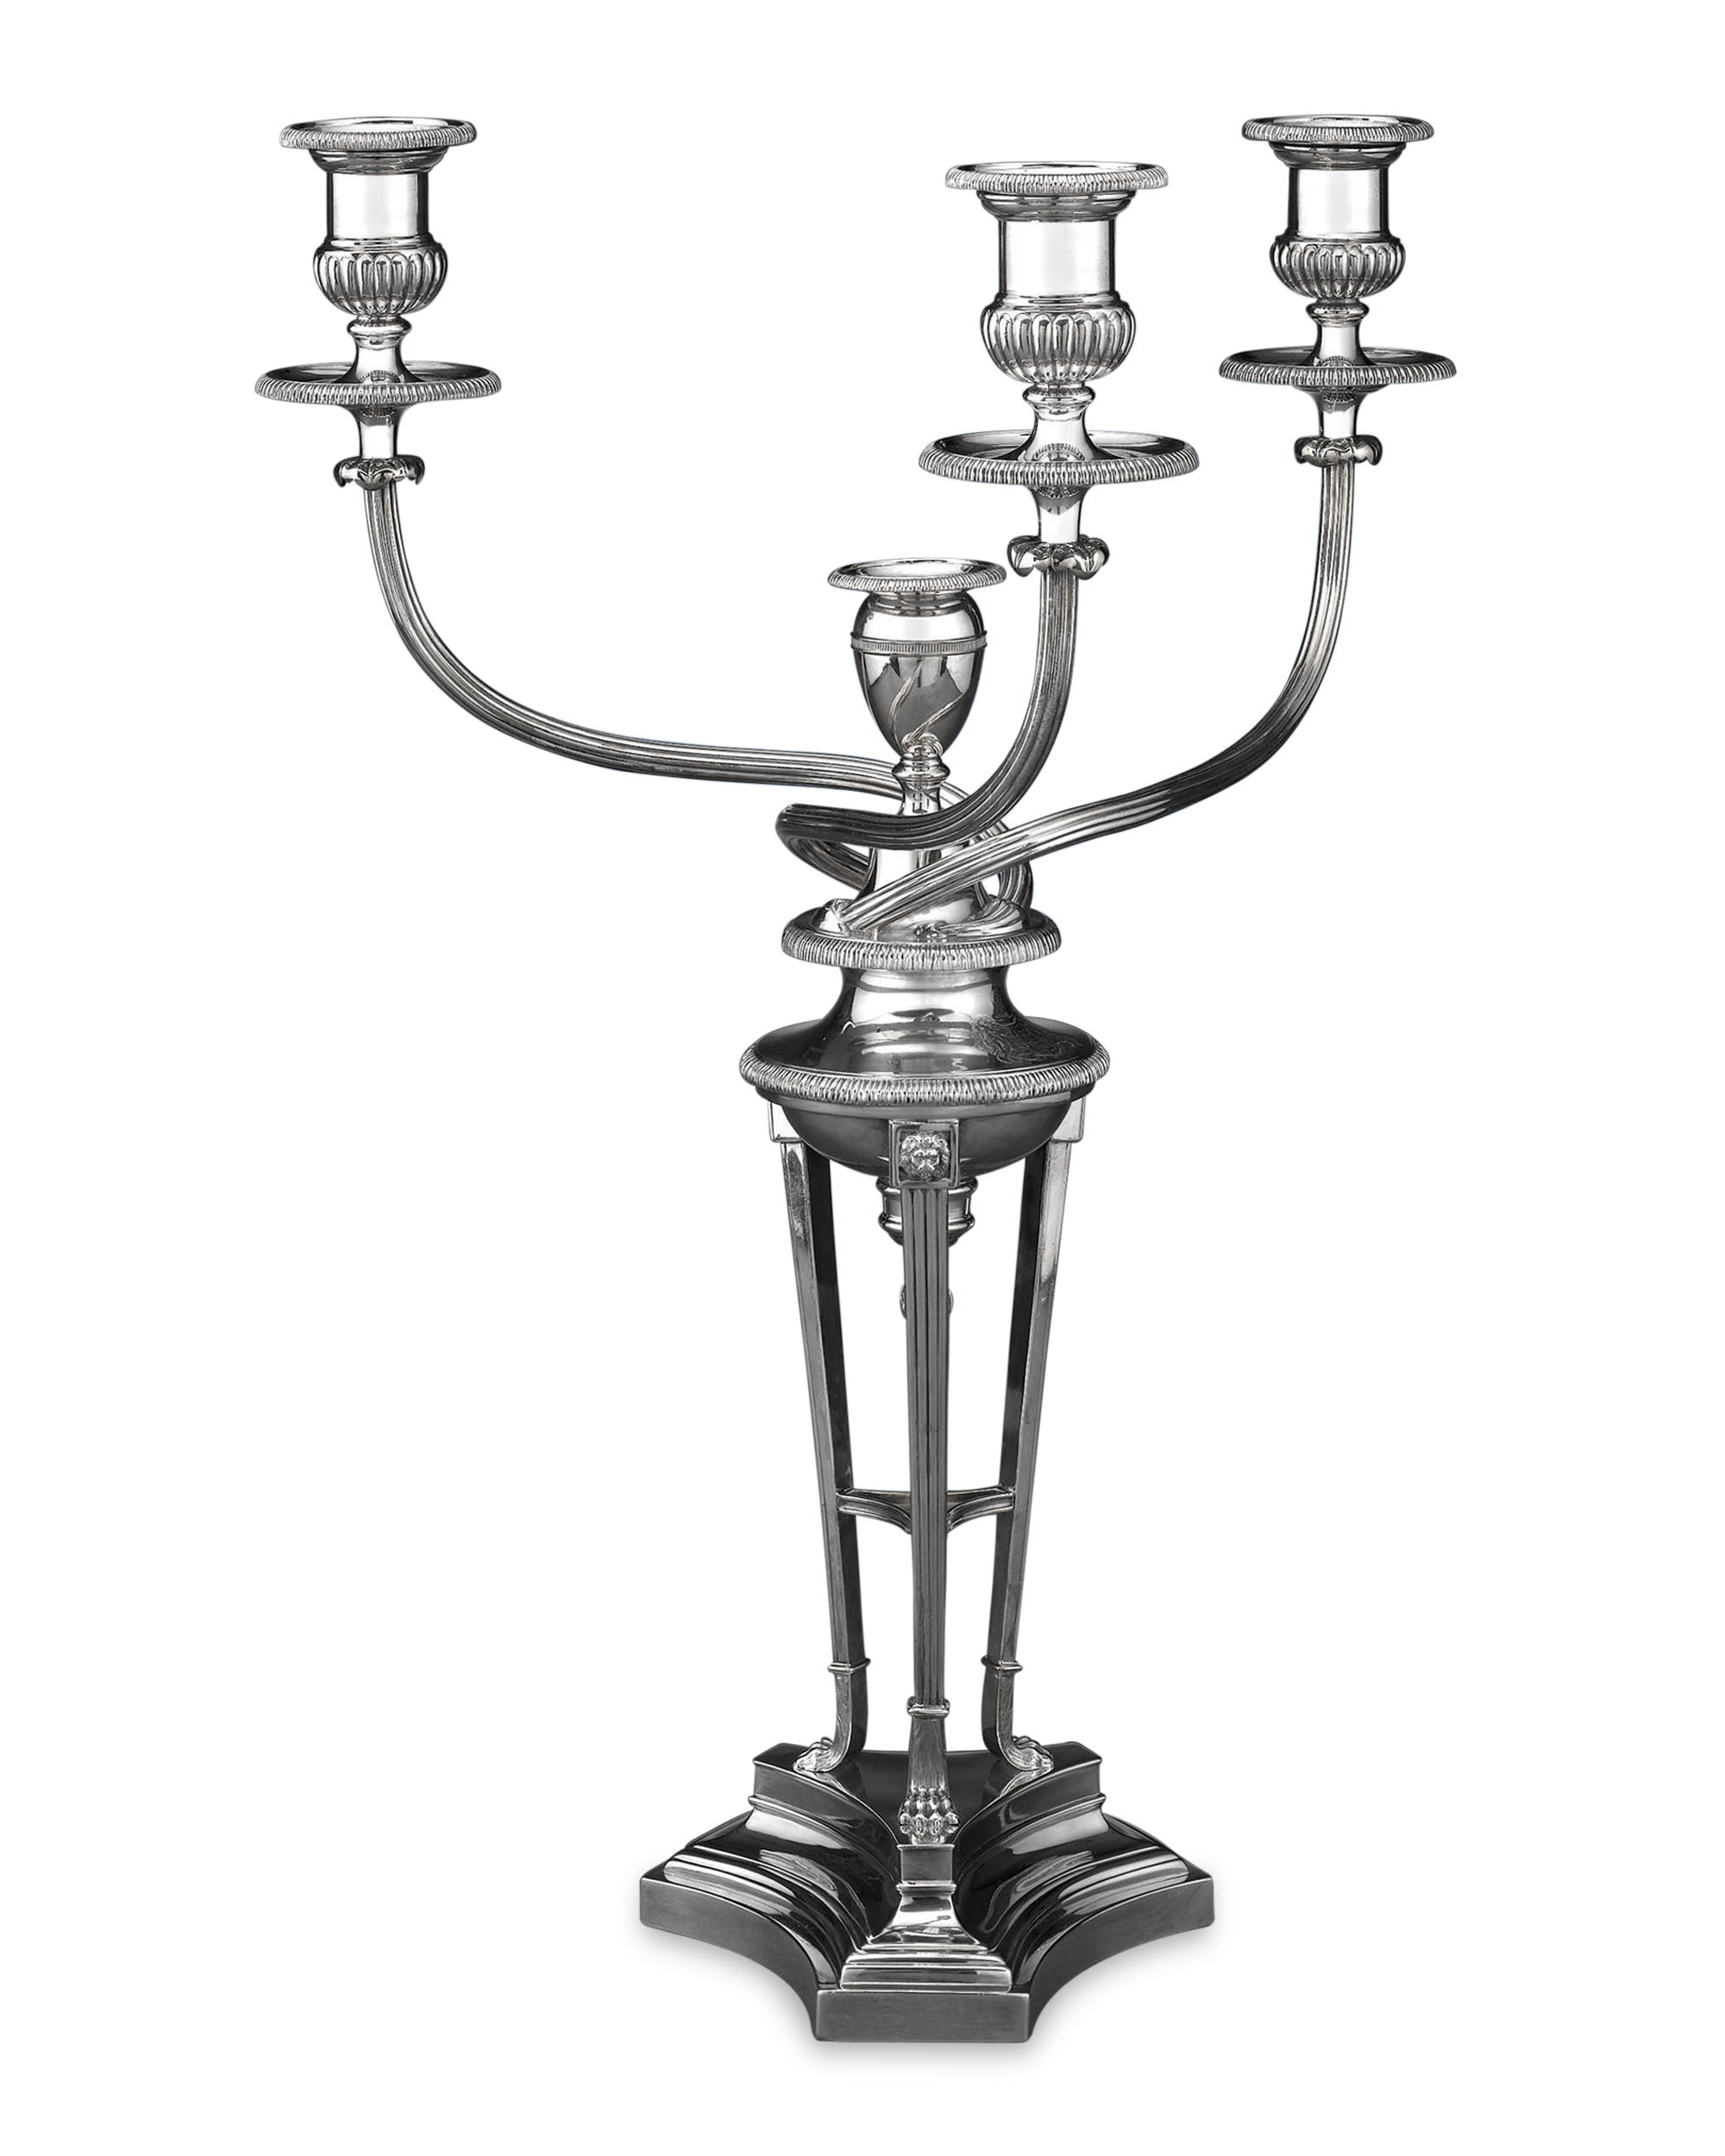 This candelabrum is a fine example of Sheffield silver plate